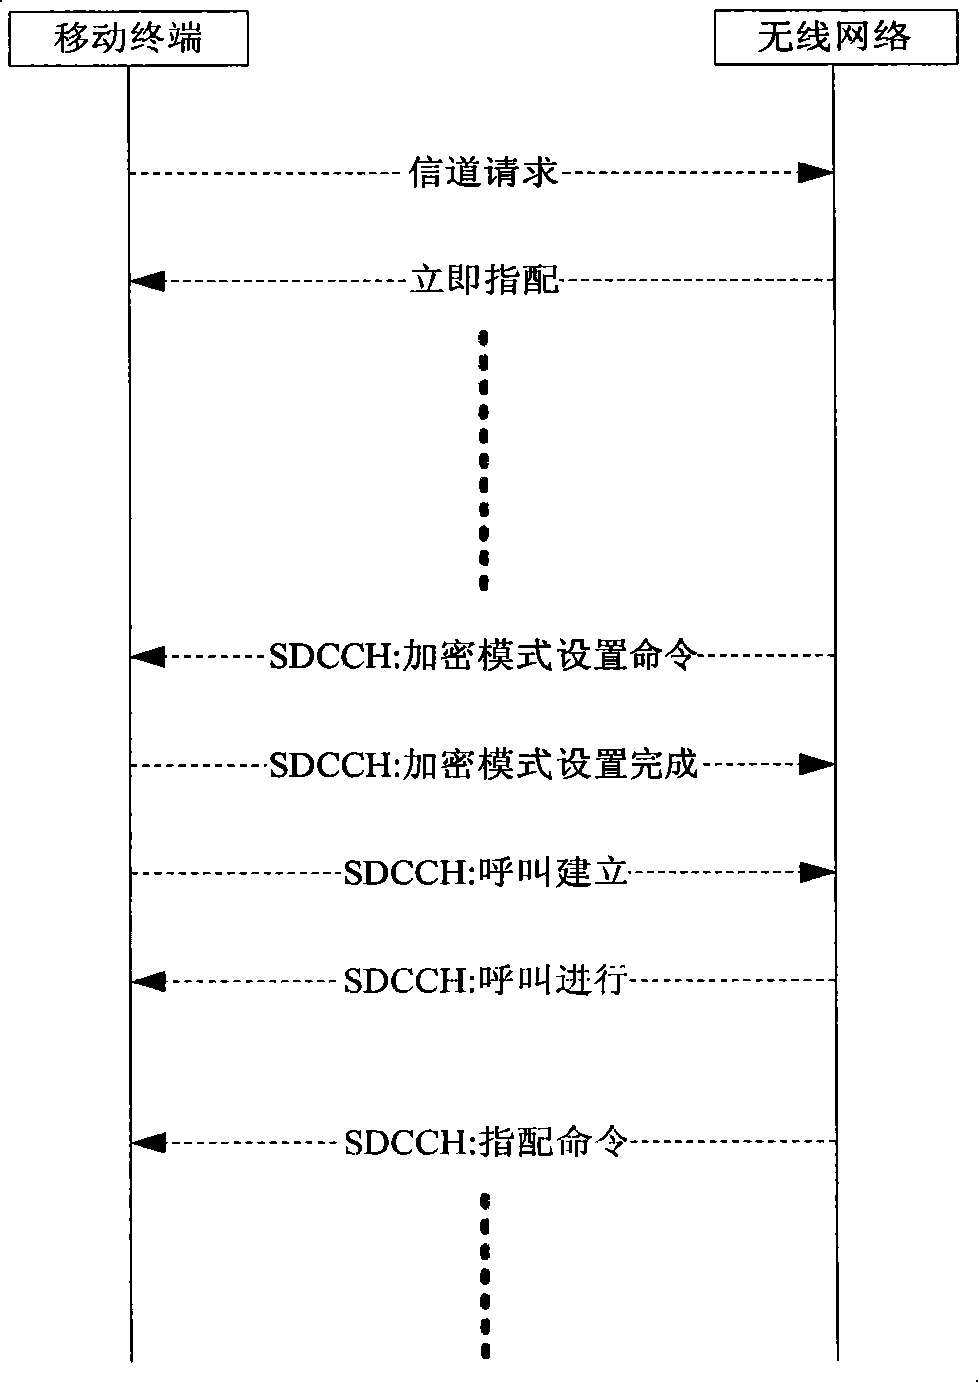 Method for enhancing wireless communication system security and wireless network equipment